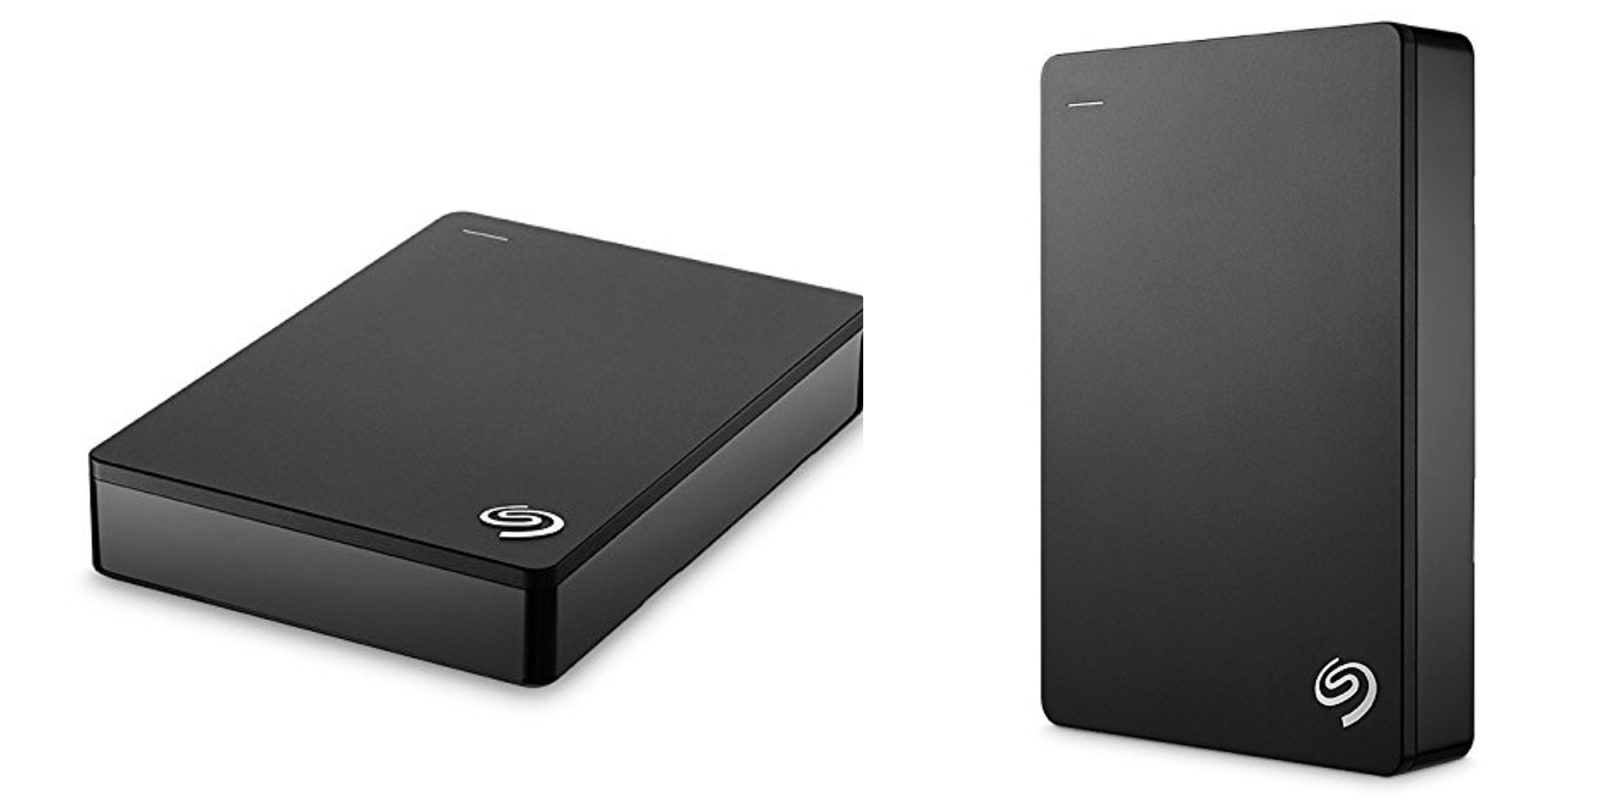 Store all your files on Seagate's 5TB portable USB 3.0